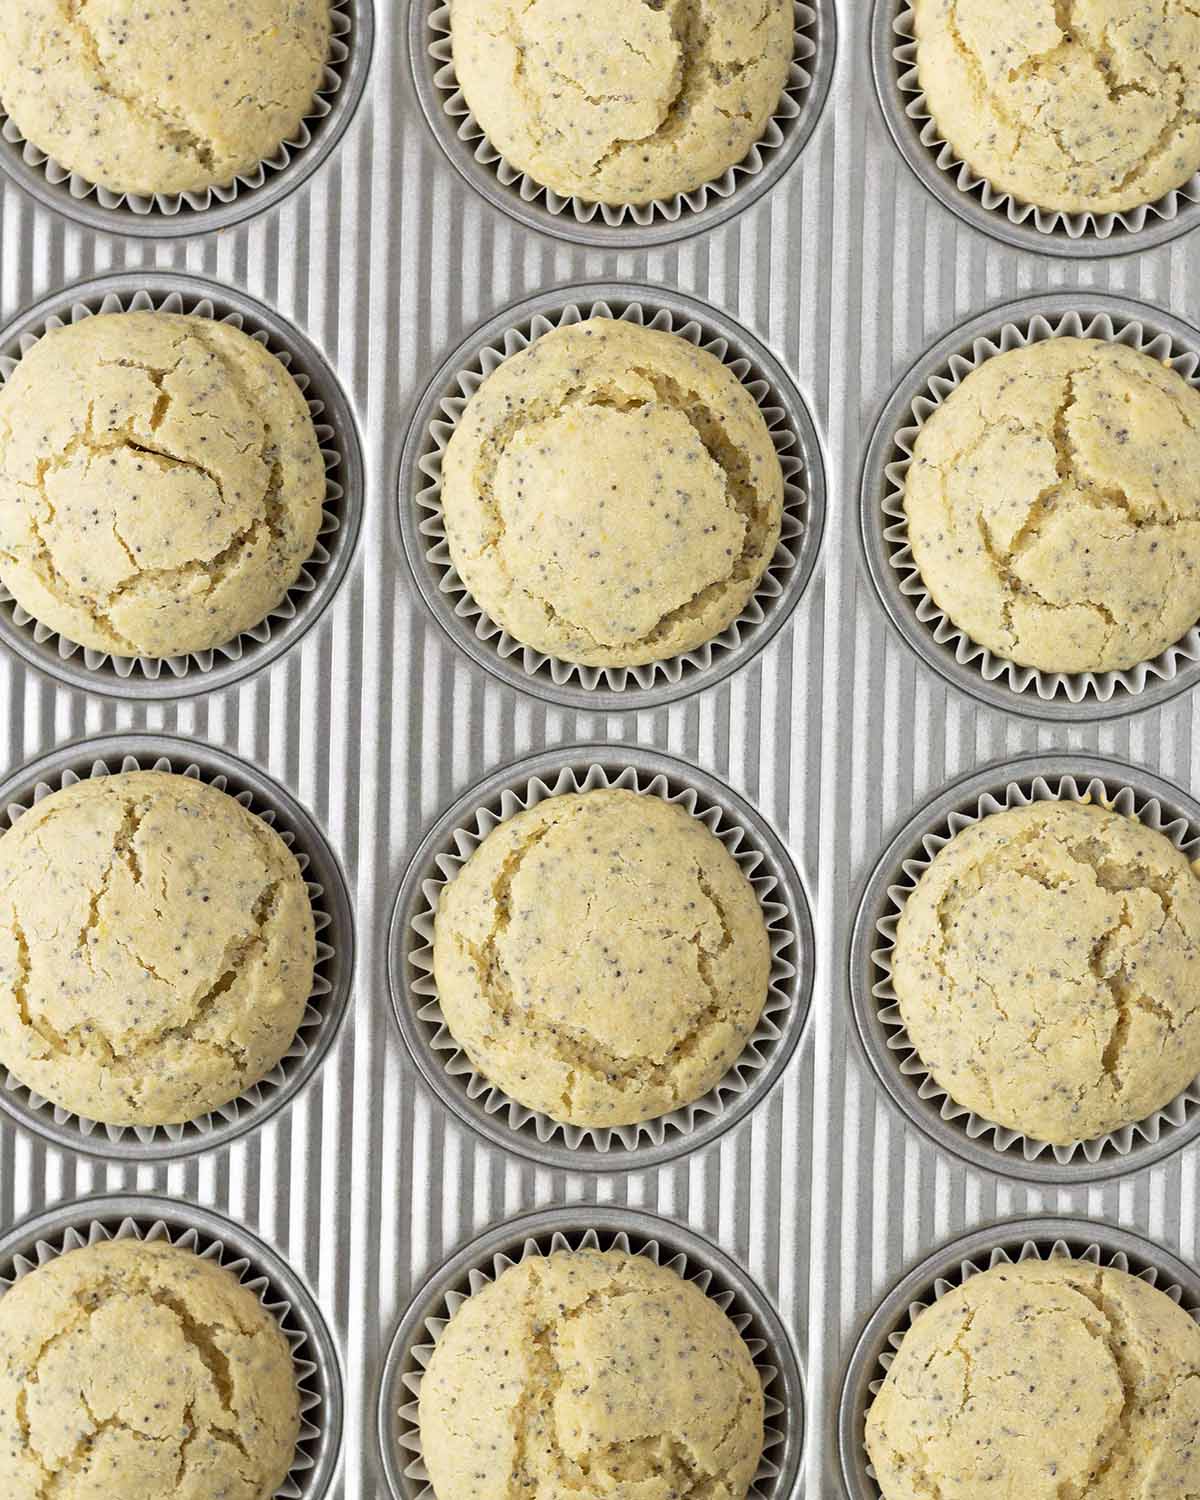 Overhead shot of a muffin pan filled with frehsly baked lemon poppy seed muffins.